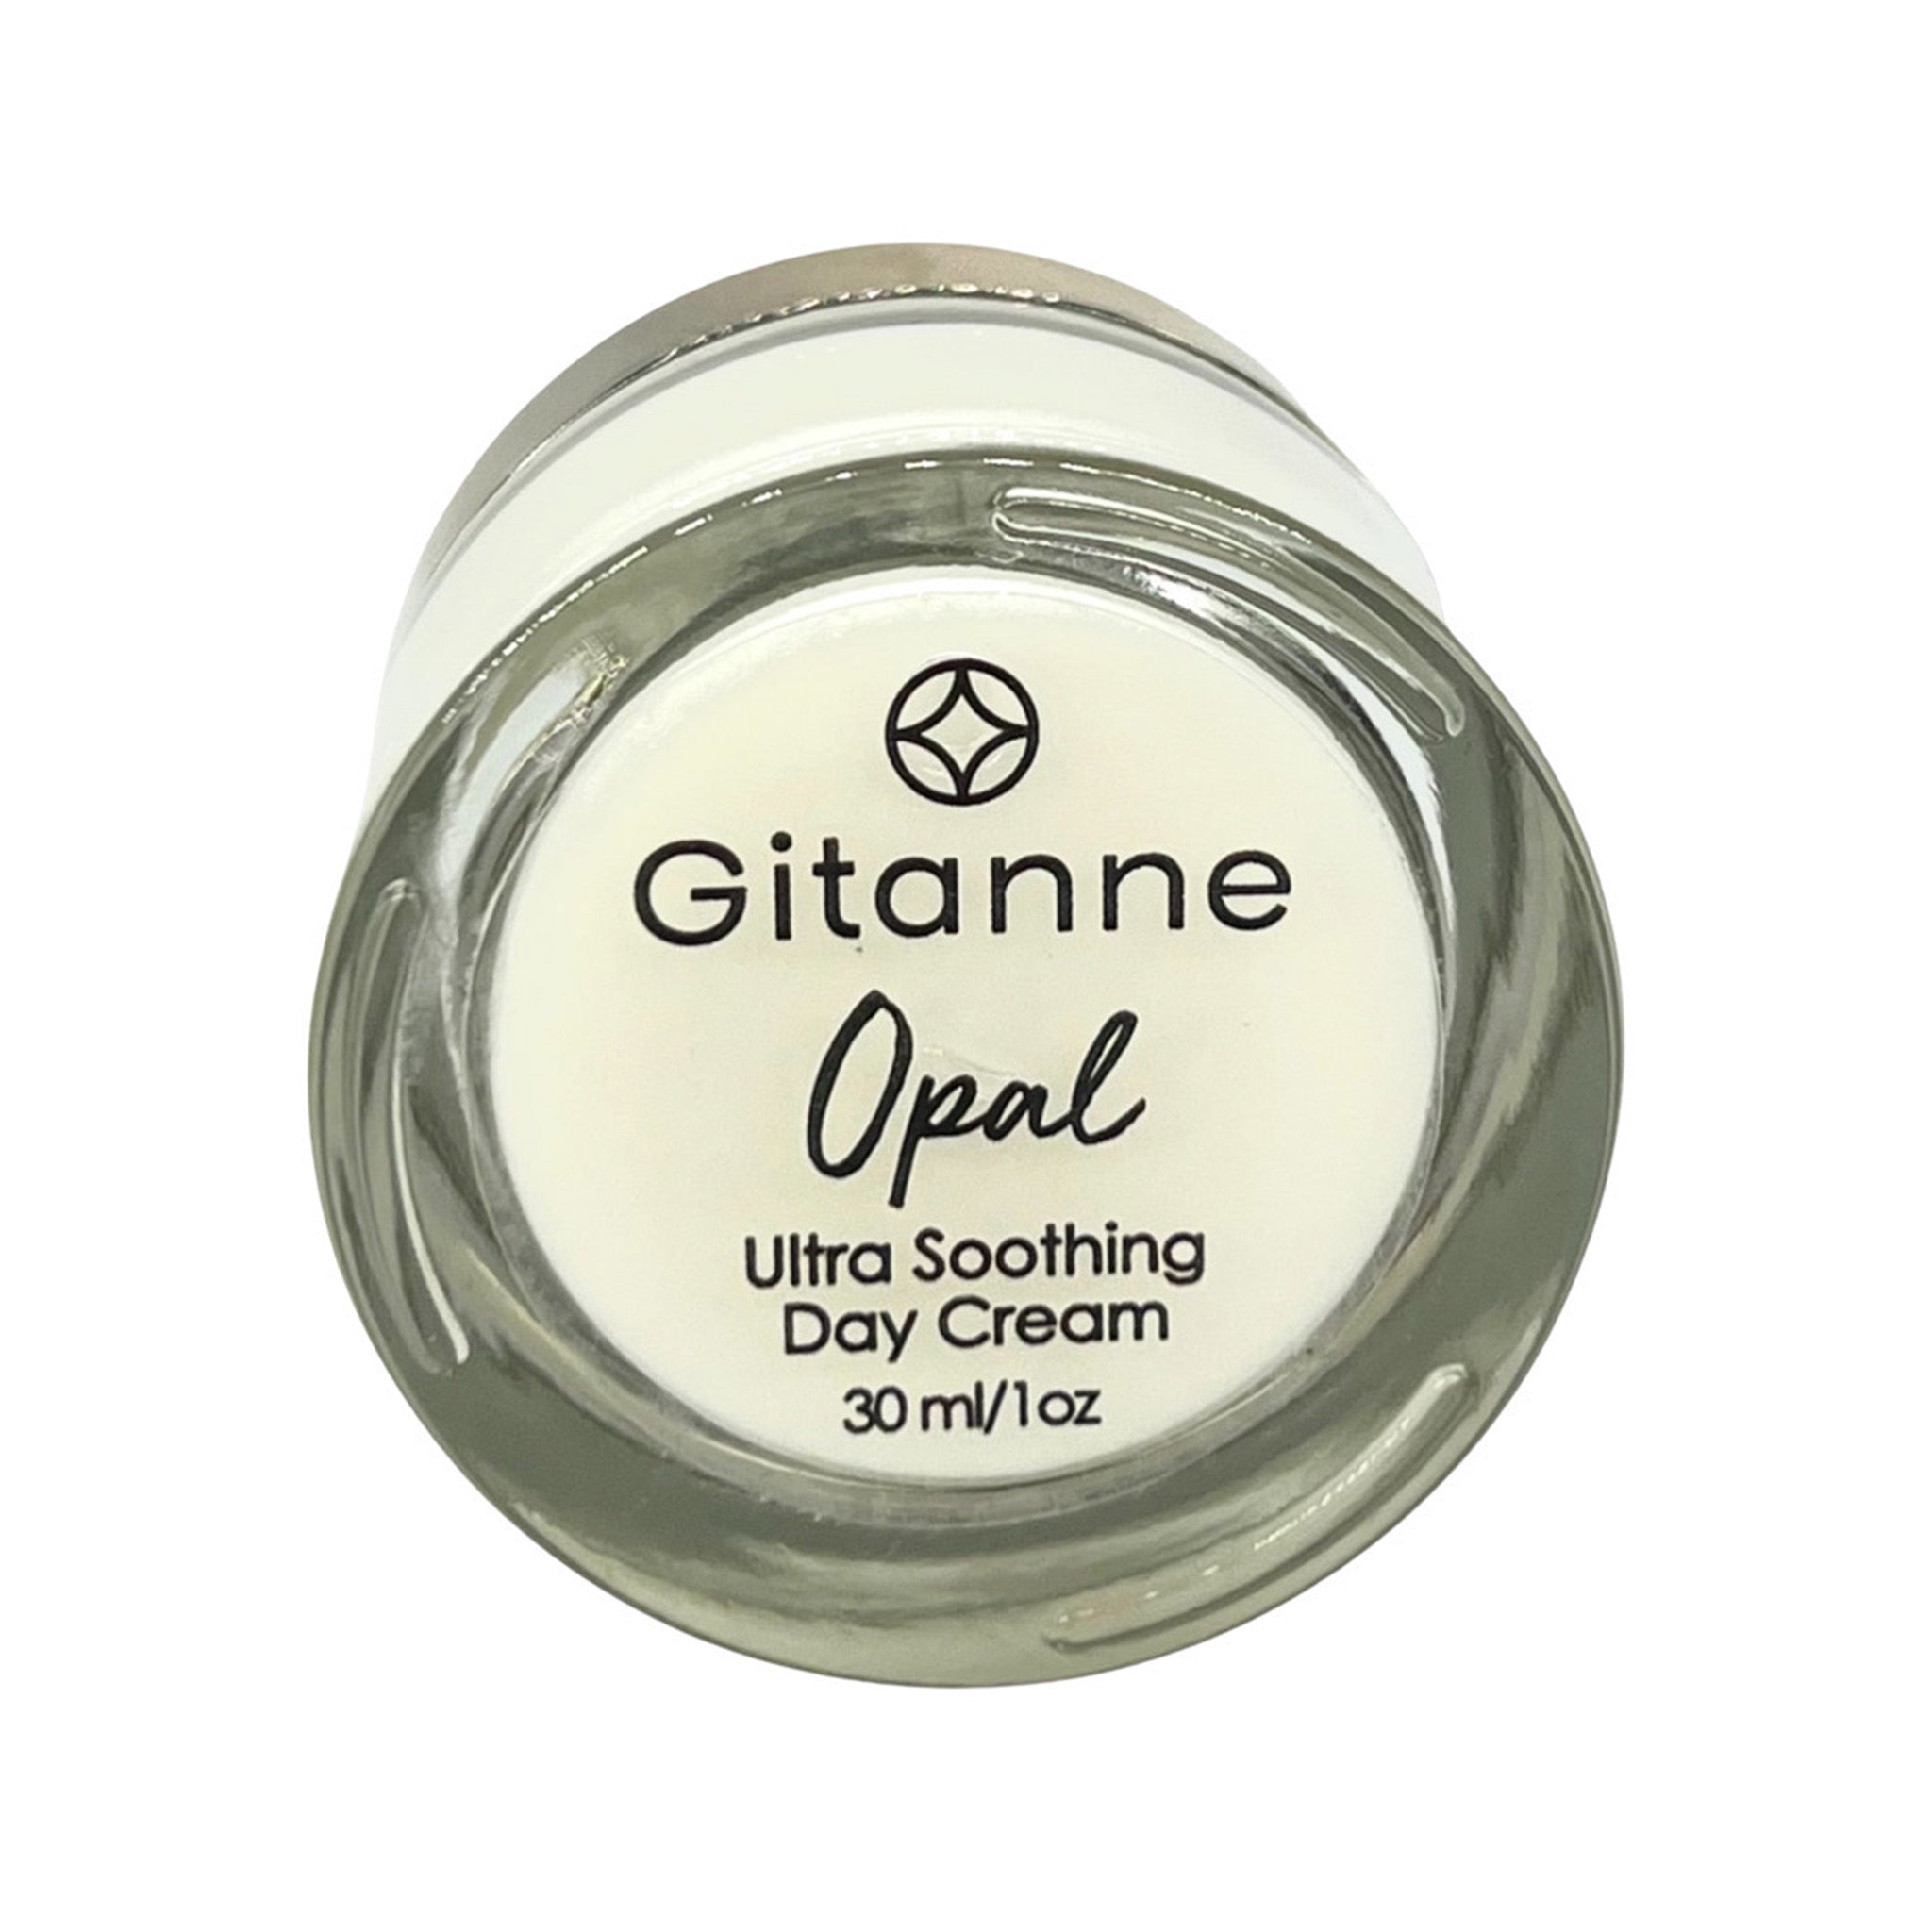 Gitanne Skincare Opal Ultra Soothing Face Cream provides deep hydration and calming effects for sensitive and irritated skin